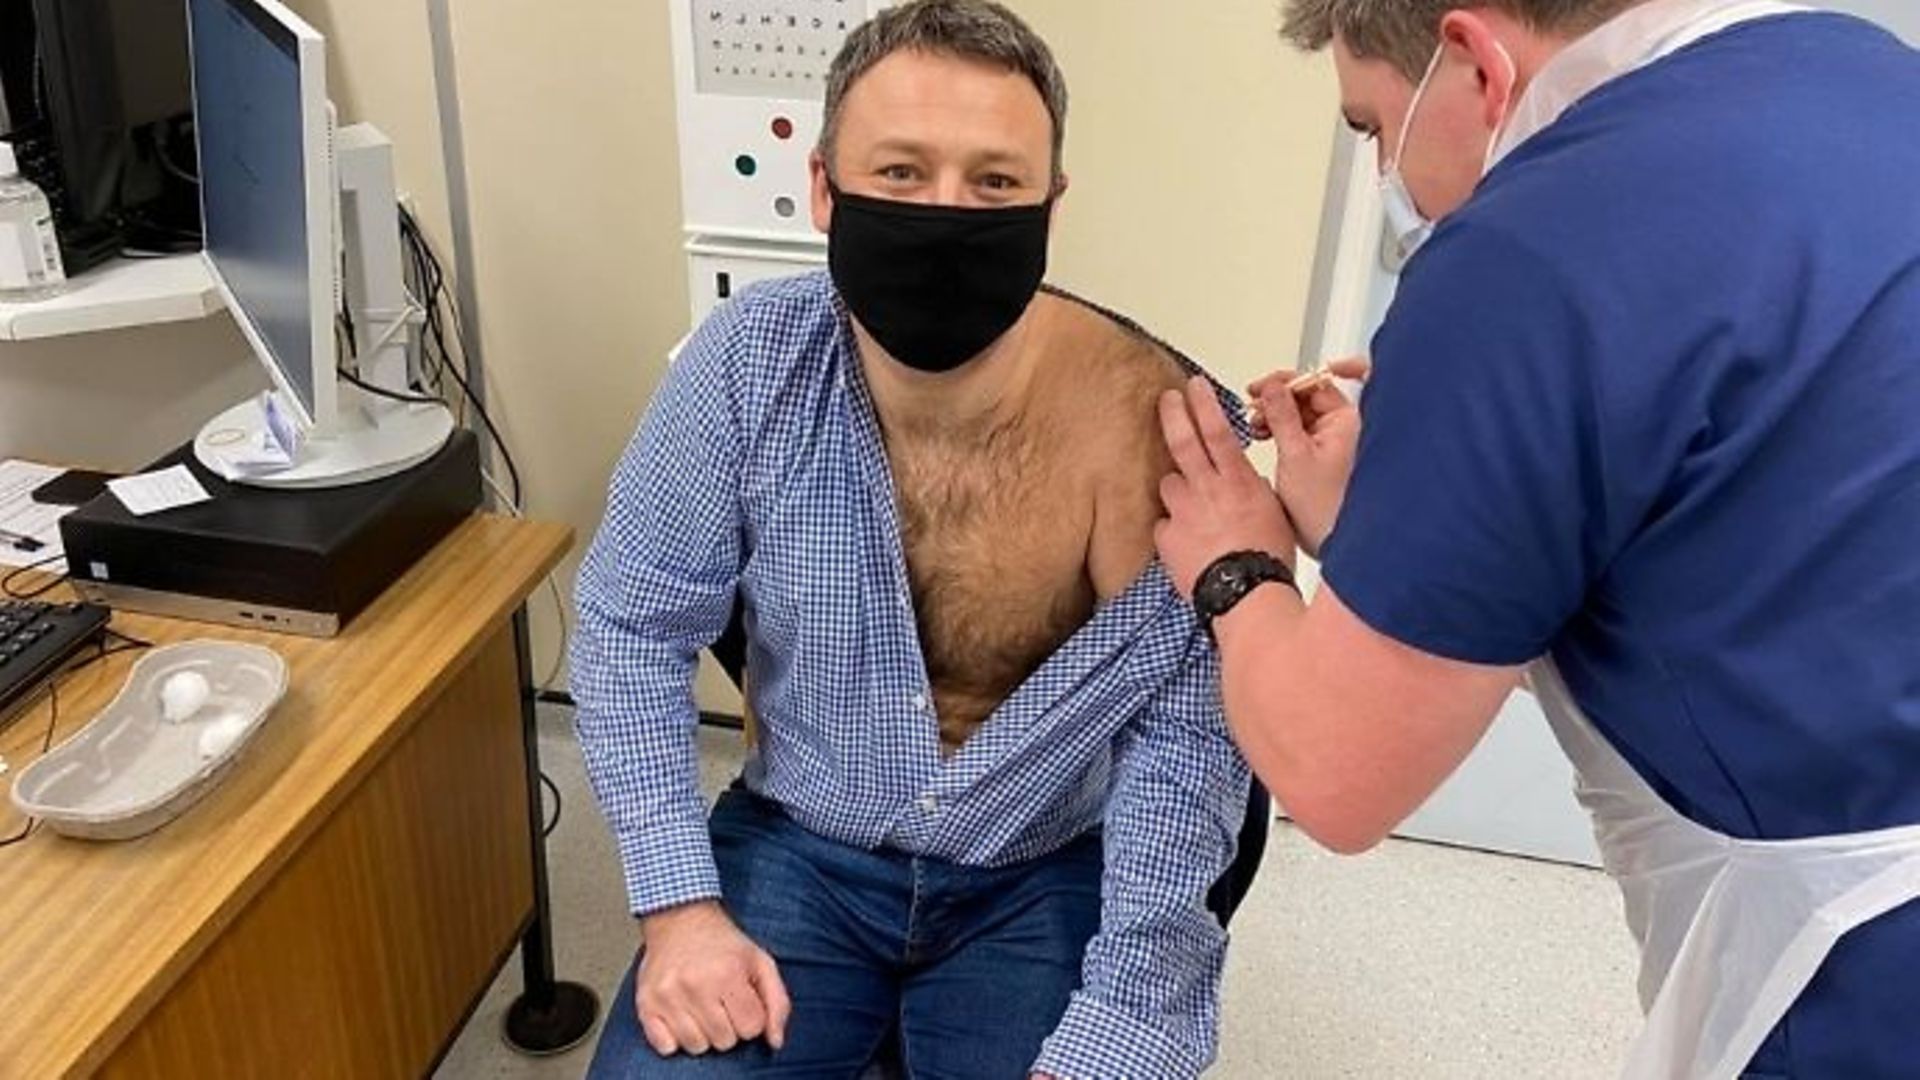 Bassetlaw MP Brendan Clarke-Smith wrote on Friday on Facebook that "as a volunteer, I was also asked to have a vaccine" - Credit: Facebook